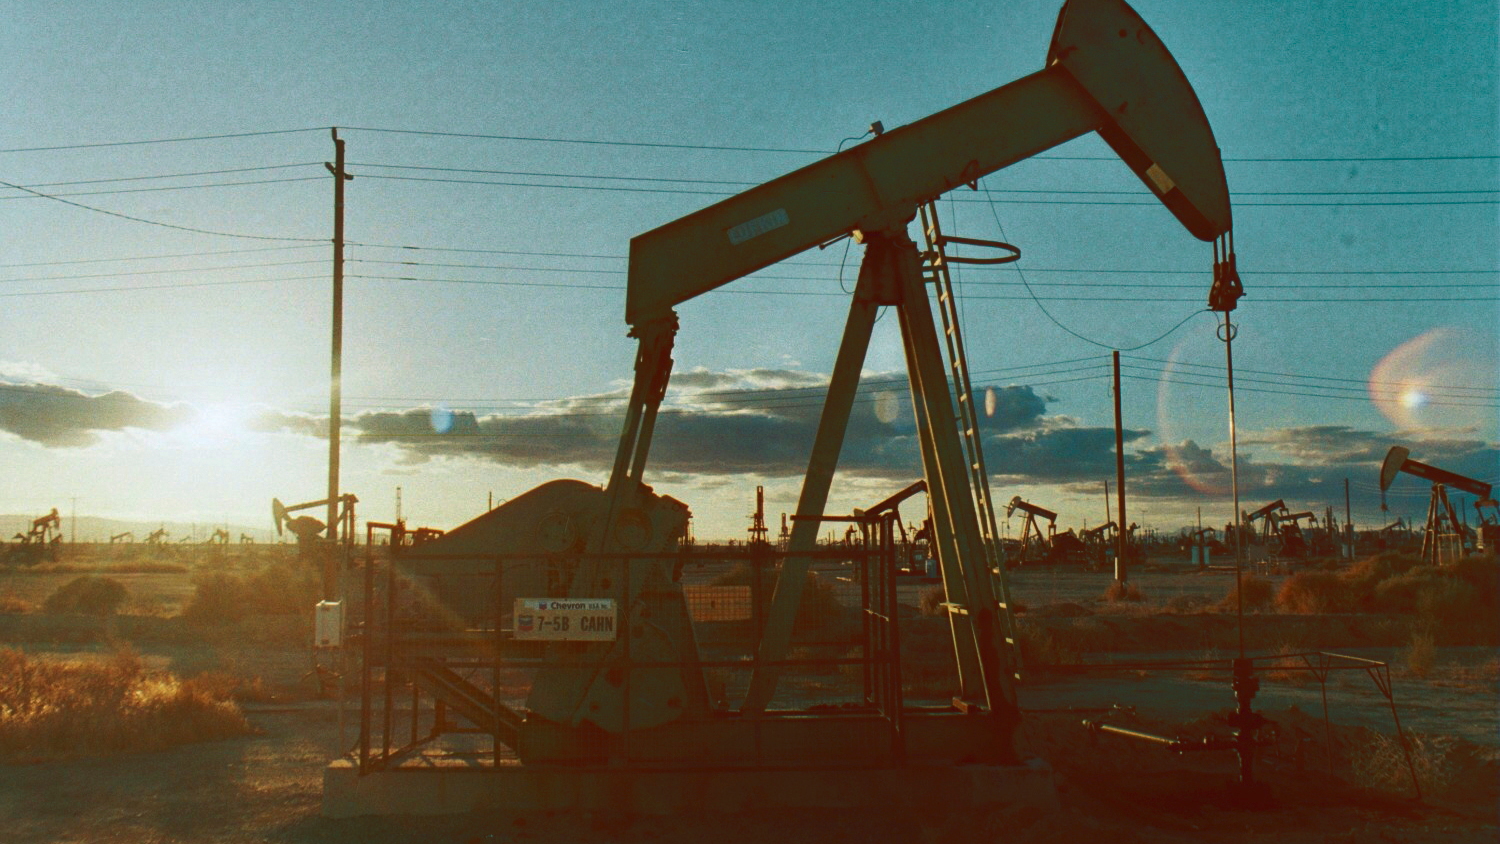 Oil field (Image: Flickr user johnny choura, used under CC license)